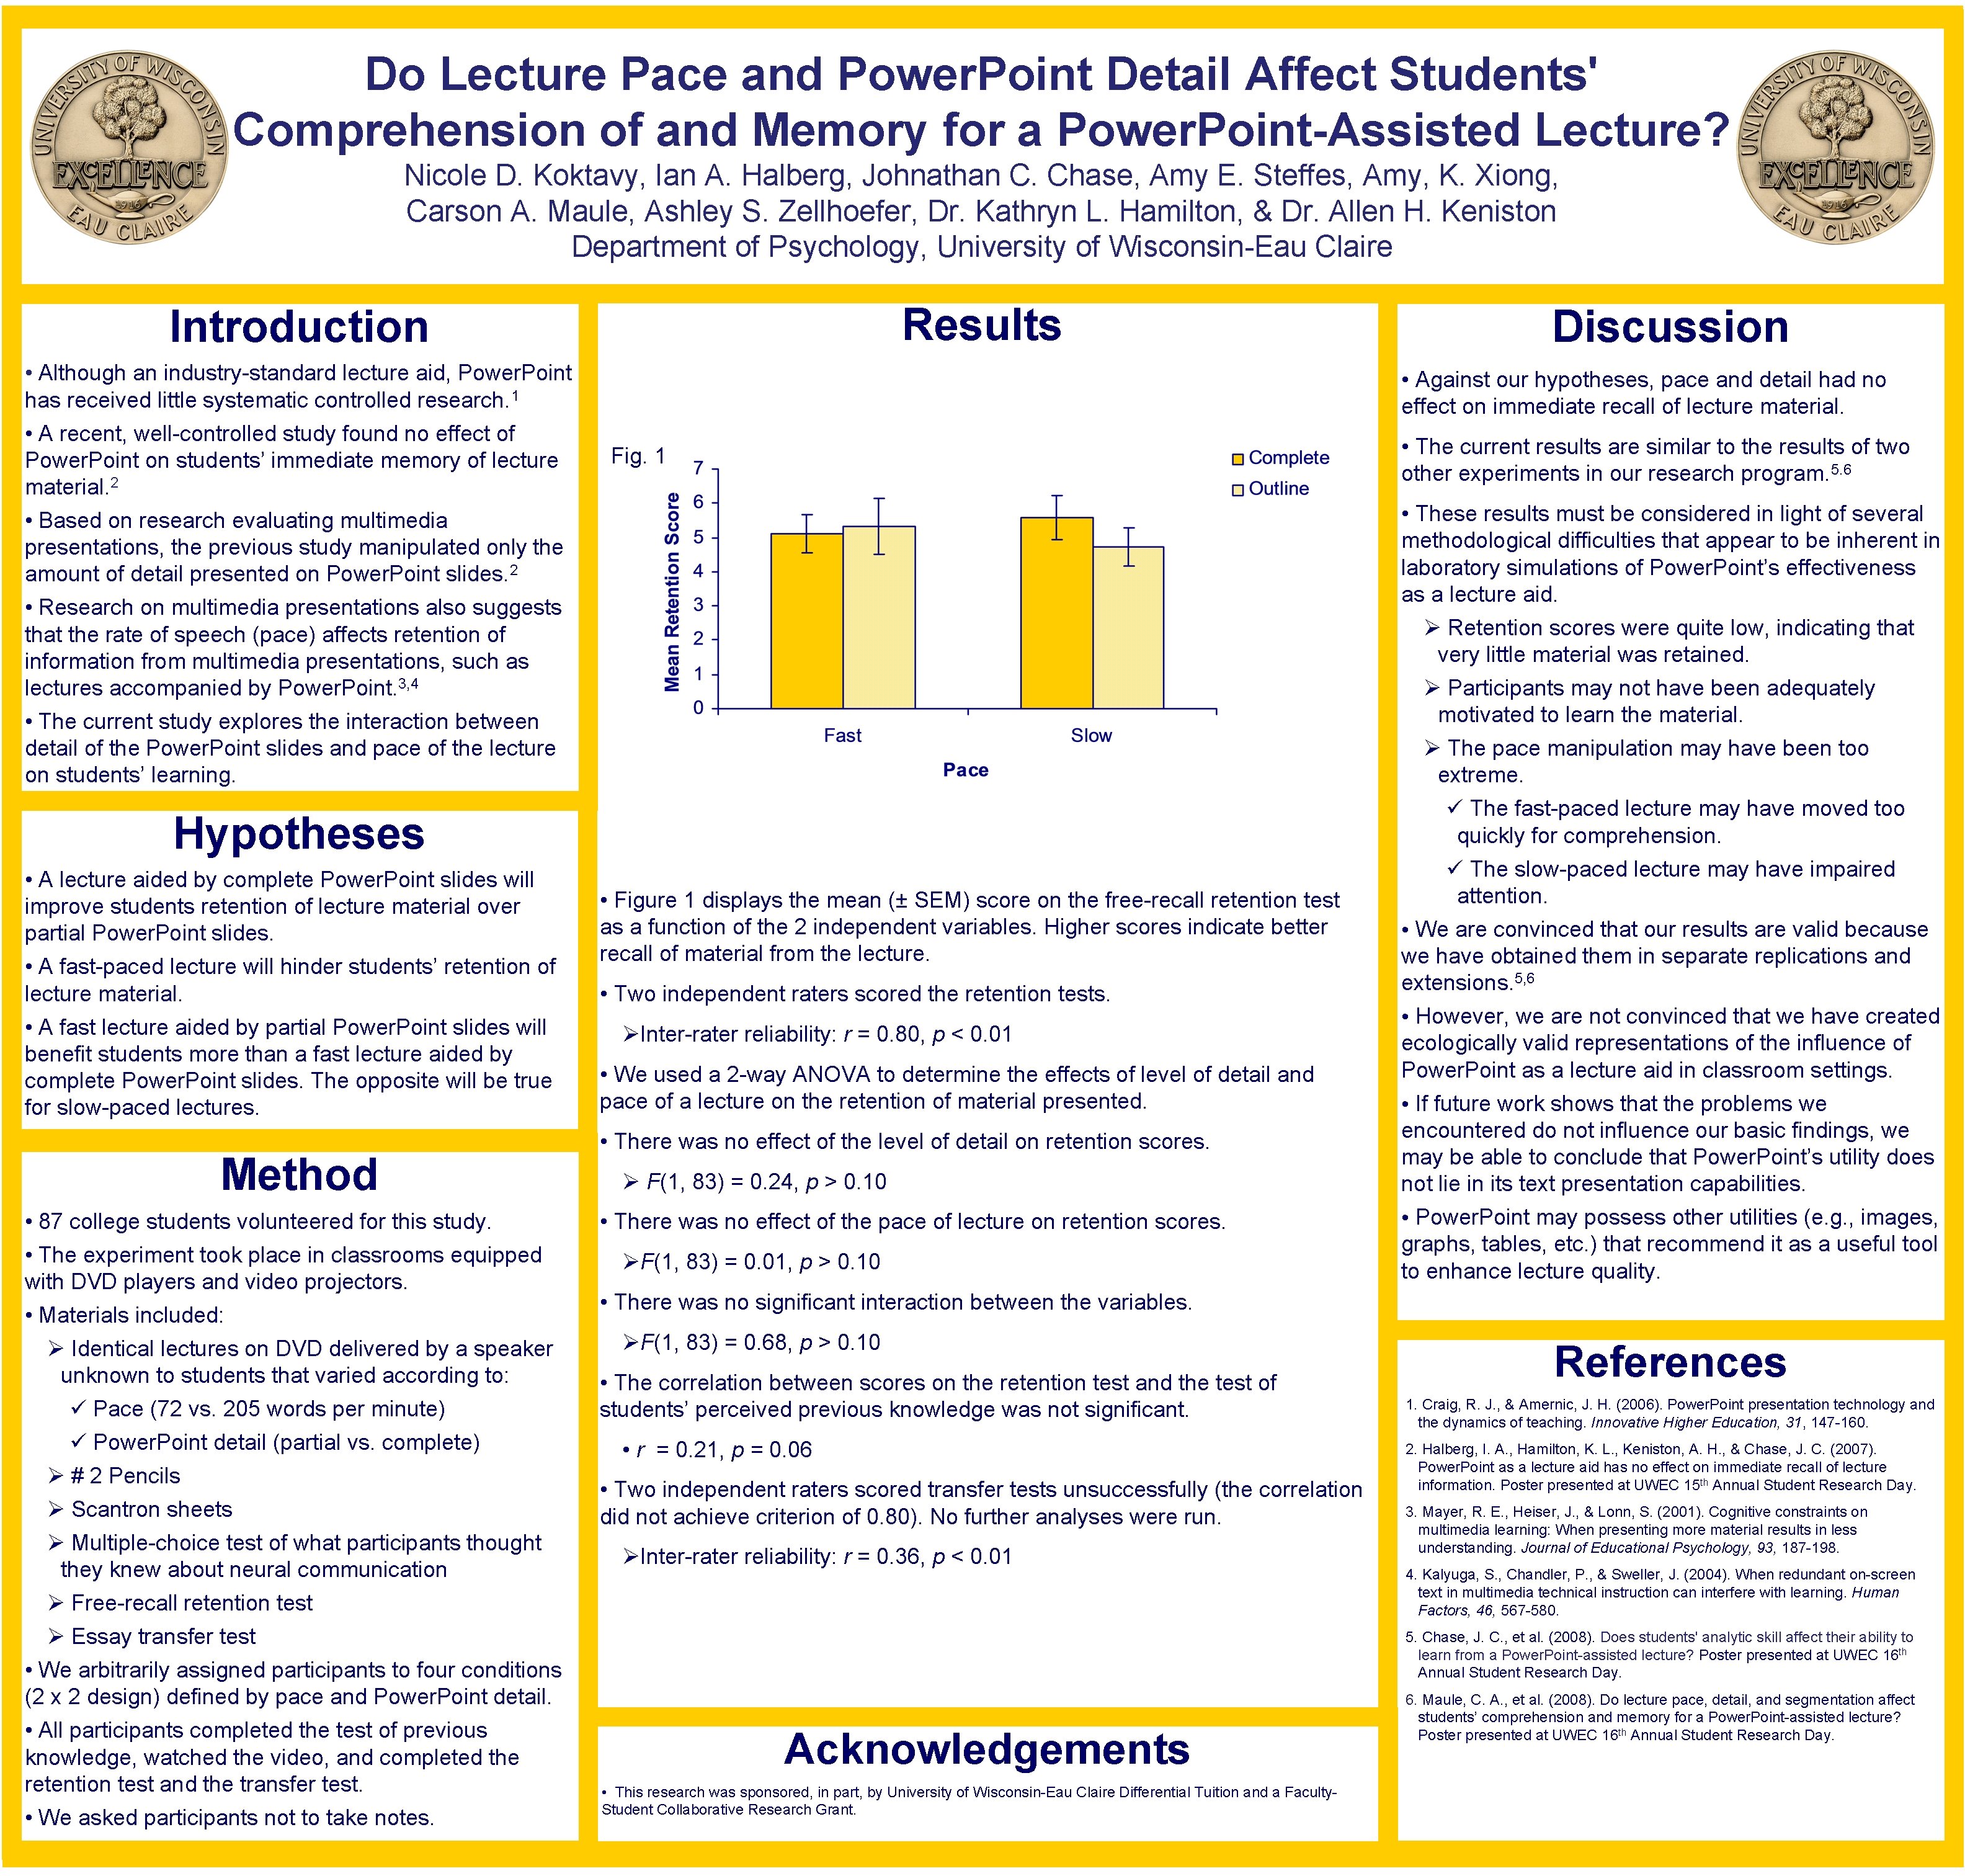 Do Lecture Pace and Power. Point Detail Affect Students' Comprehension of and Memory for